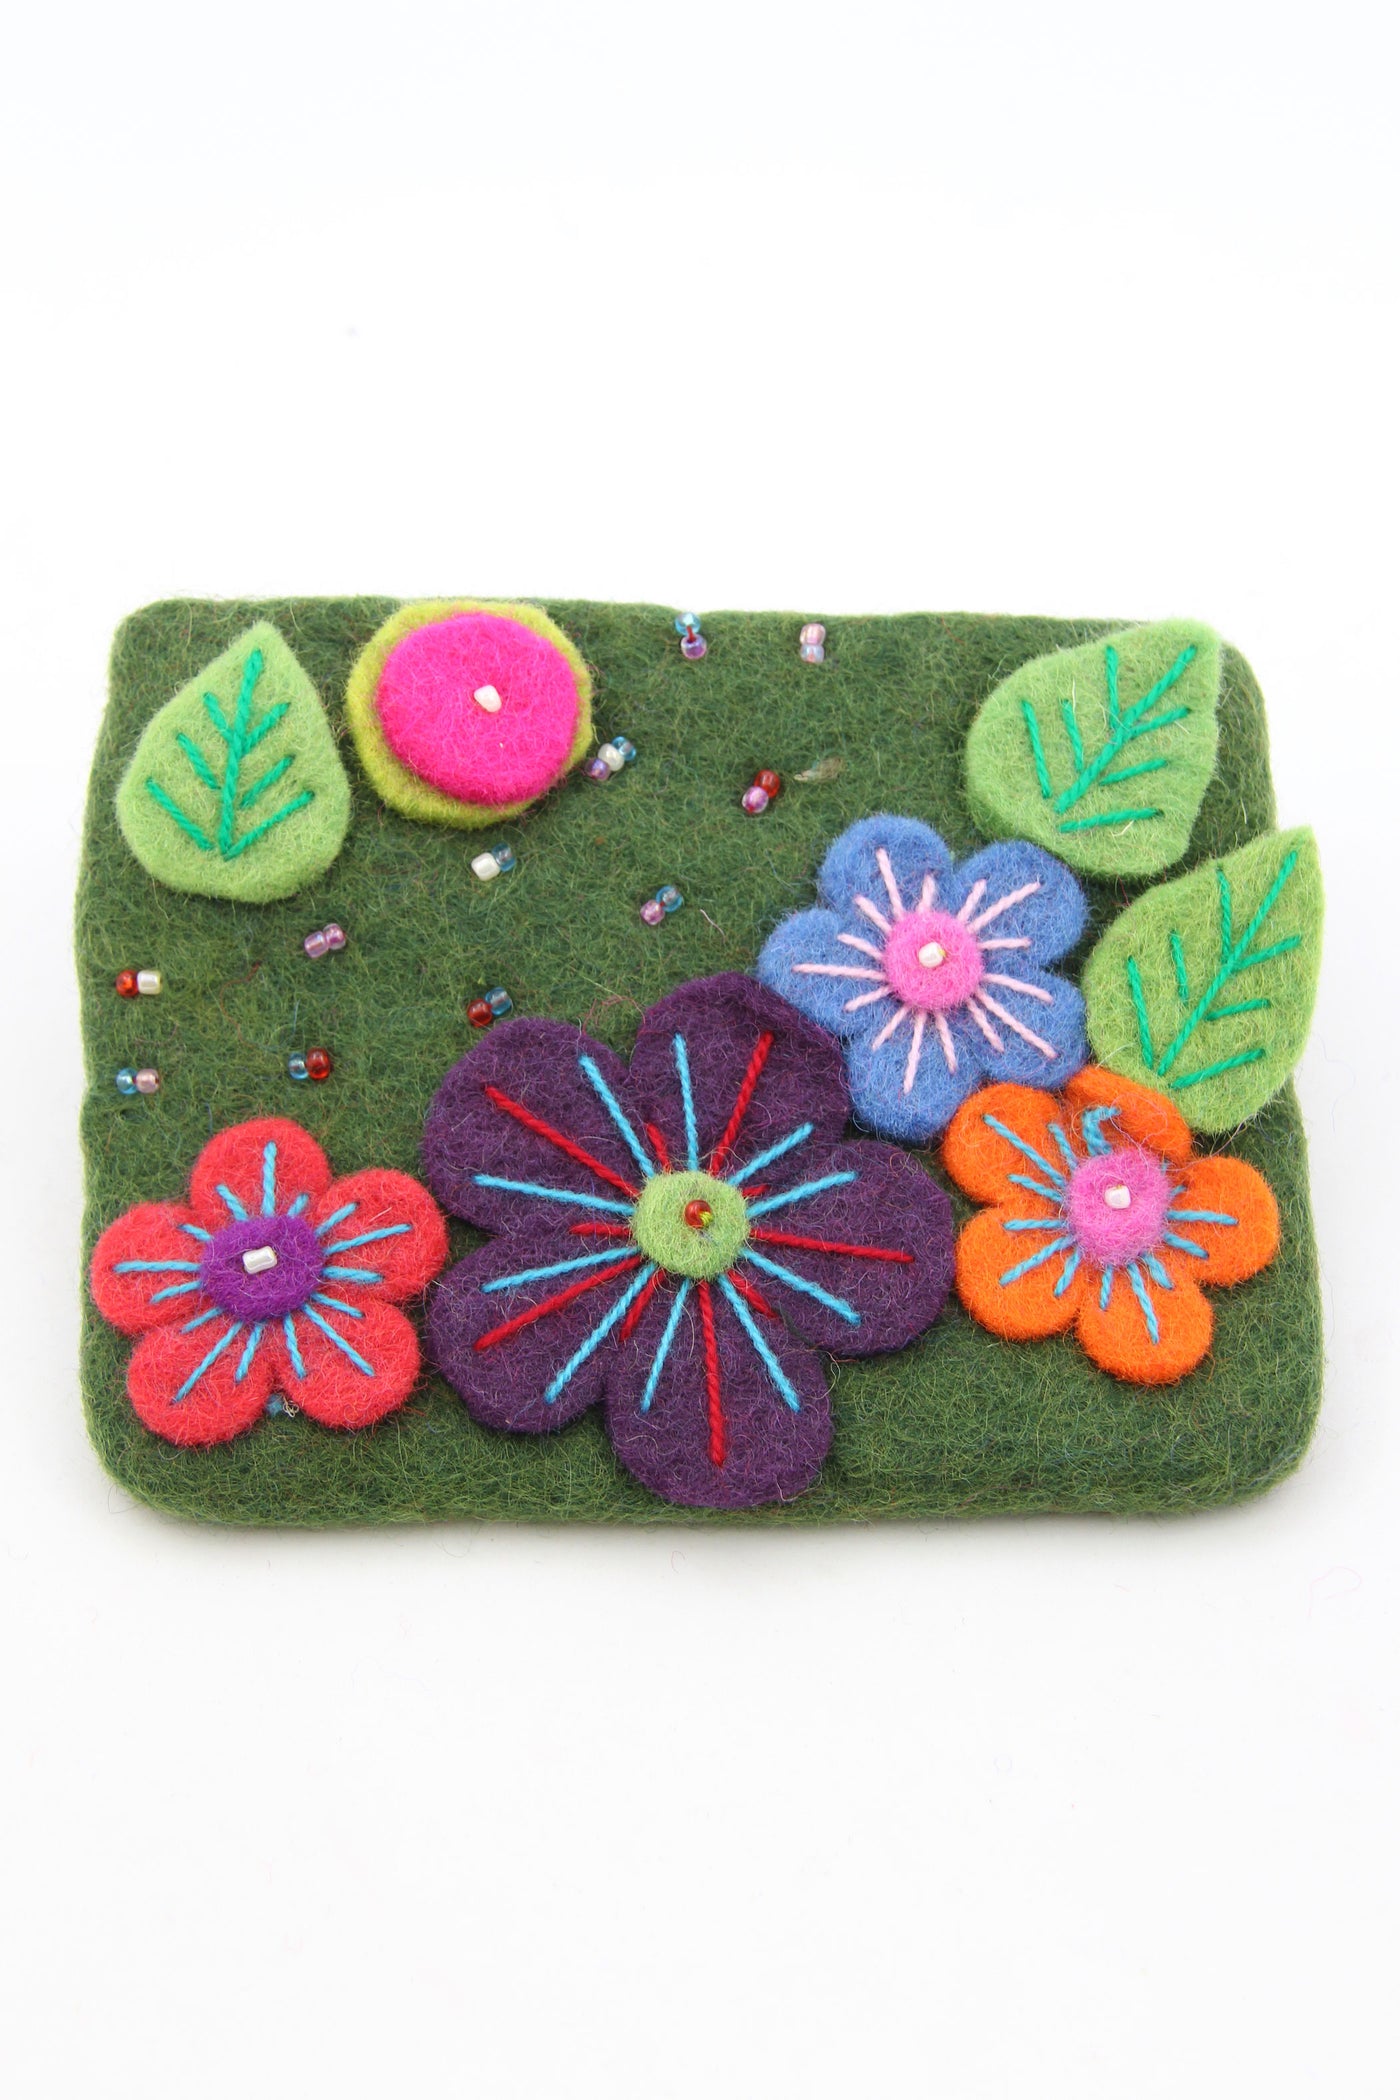 Green Floral Felted Wool Pouch, Coin Purse w/ Zipper, Fair Trade from Nepal